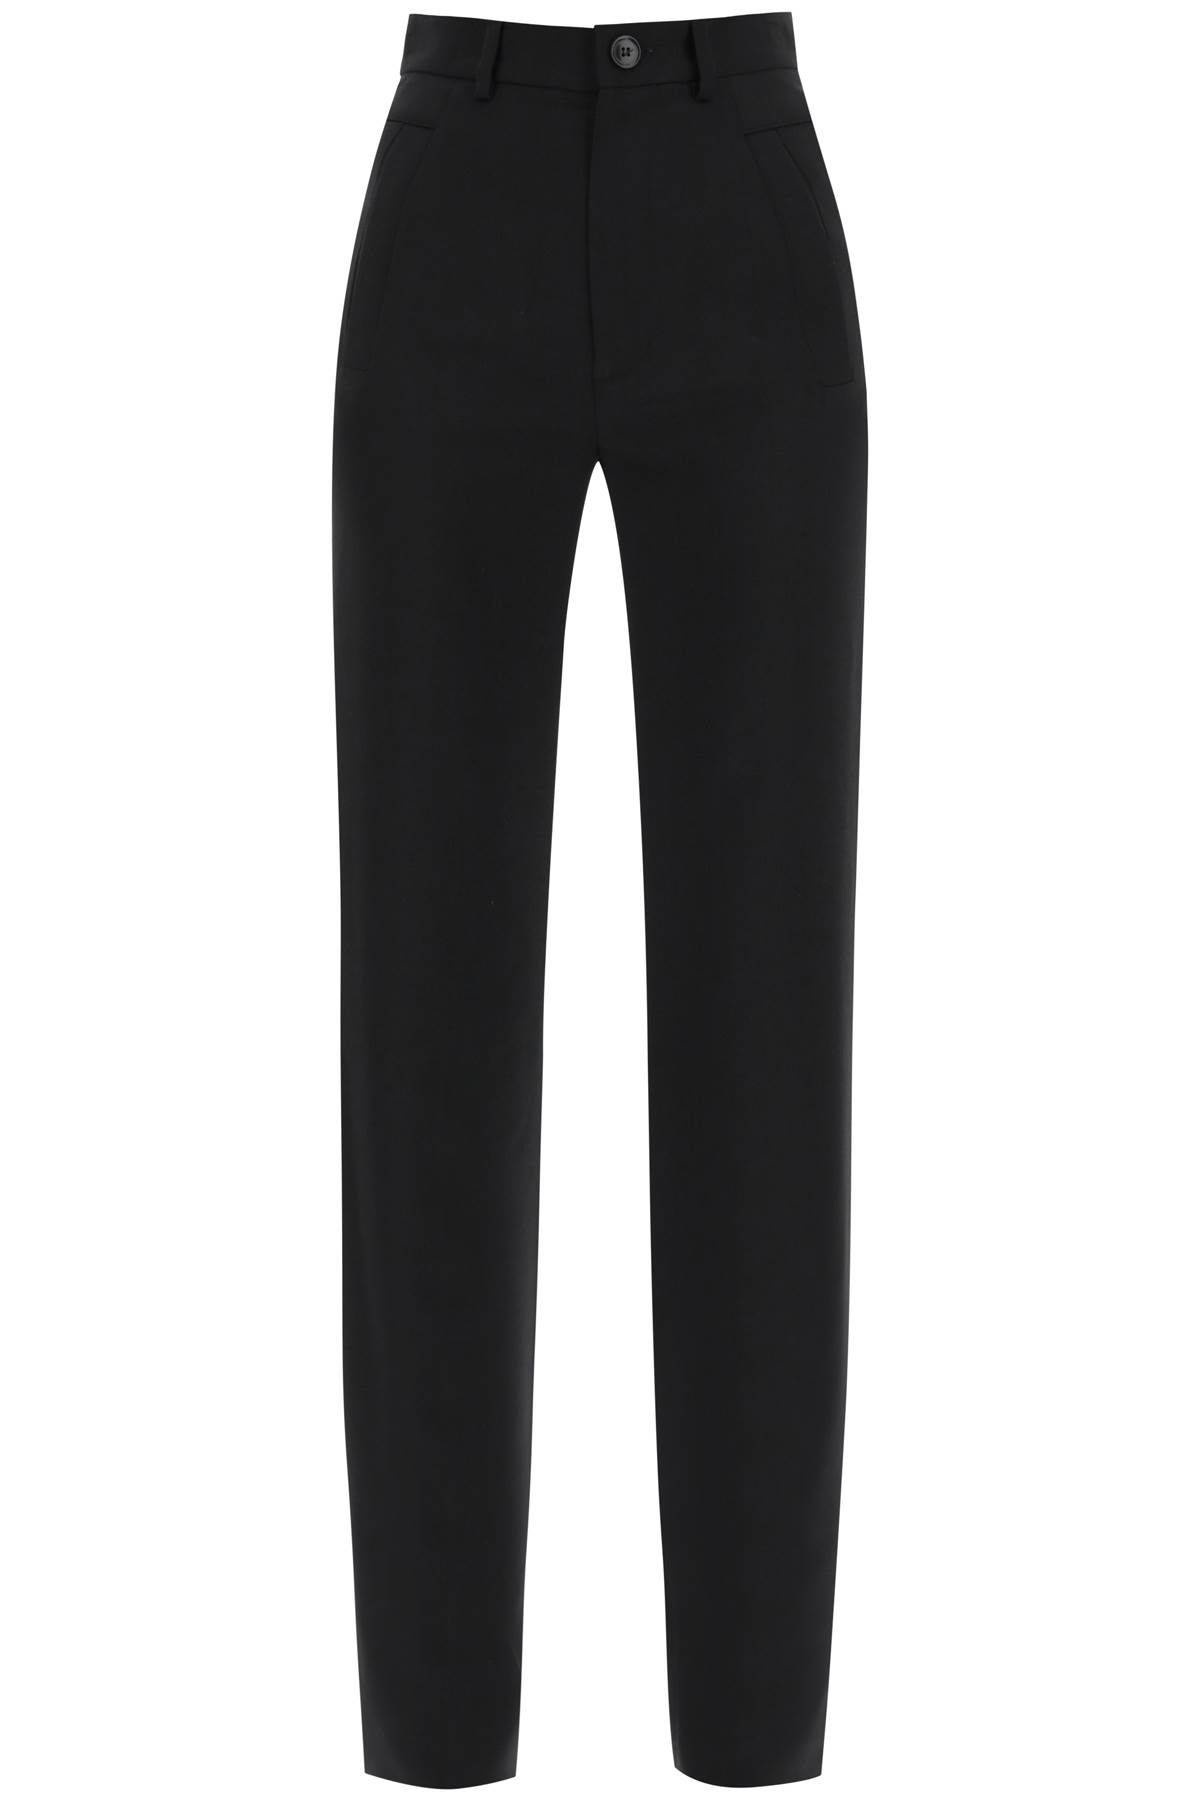 RAY TROUSERS IN WOOL SERGE - 1